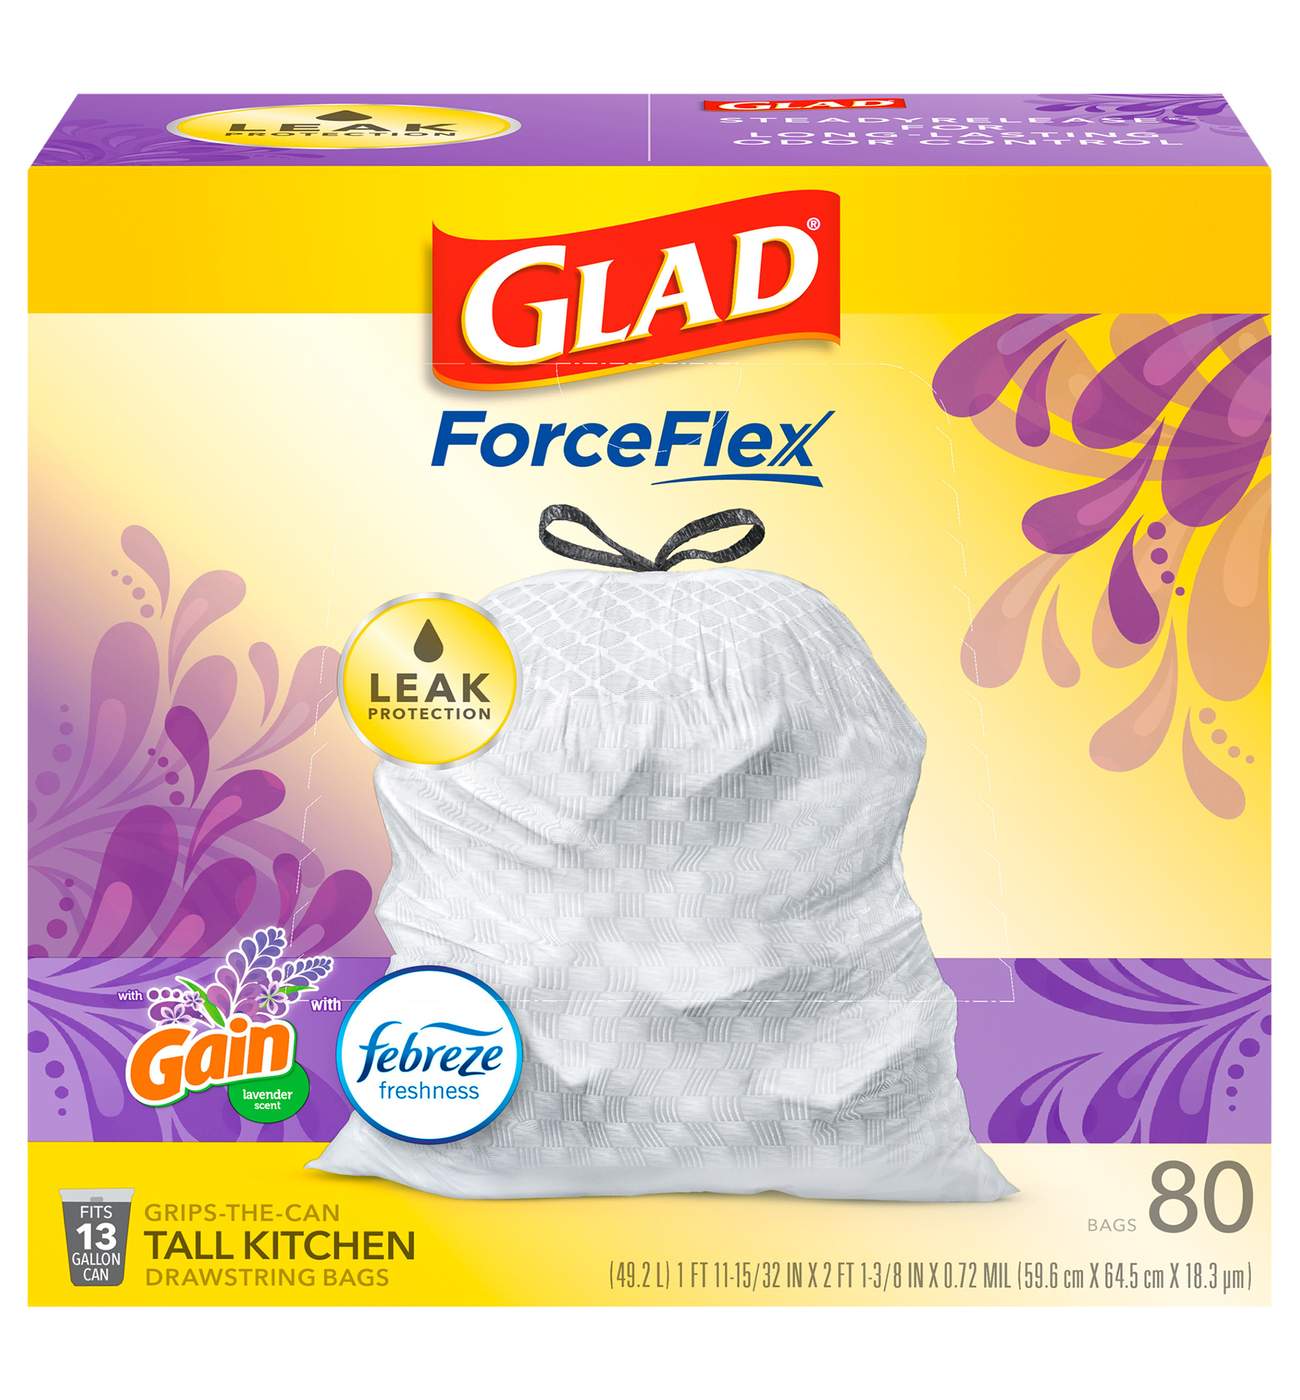 Glad ForceFlex Tall Kitchen Drawstring Trash Bags, 13 Gallon - Gain Lavender Scent with Febreze Freshness; image 1 of 2